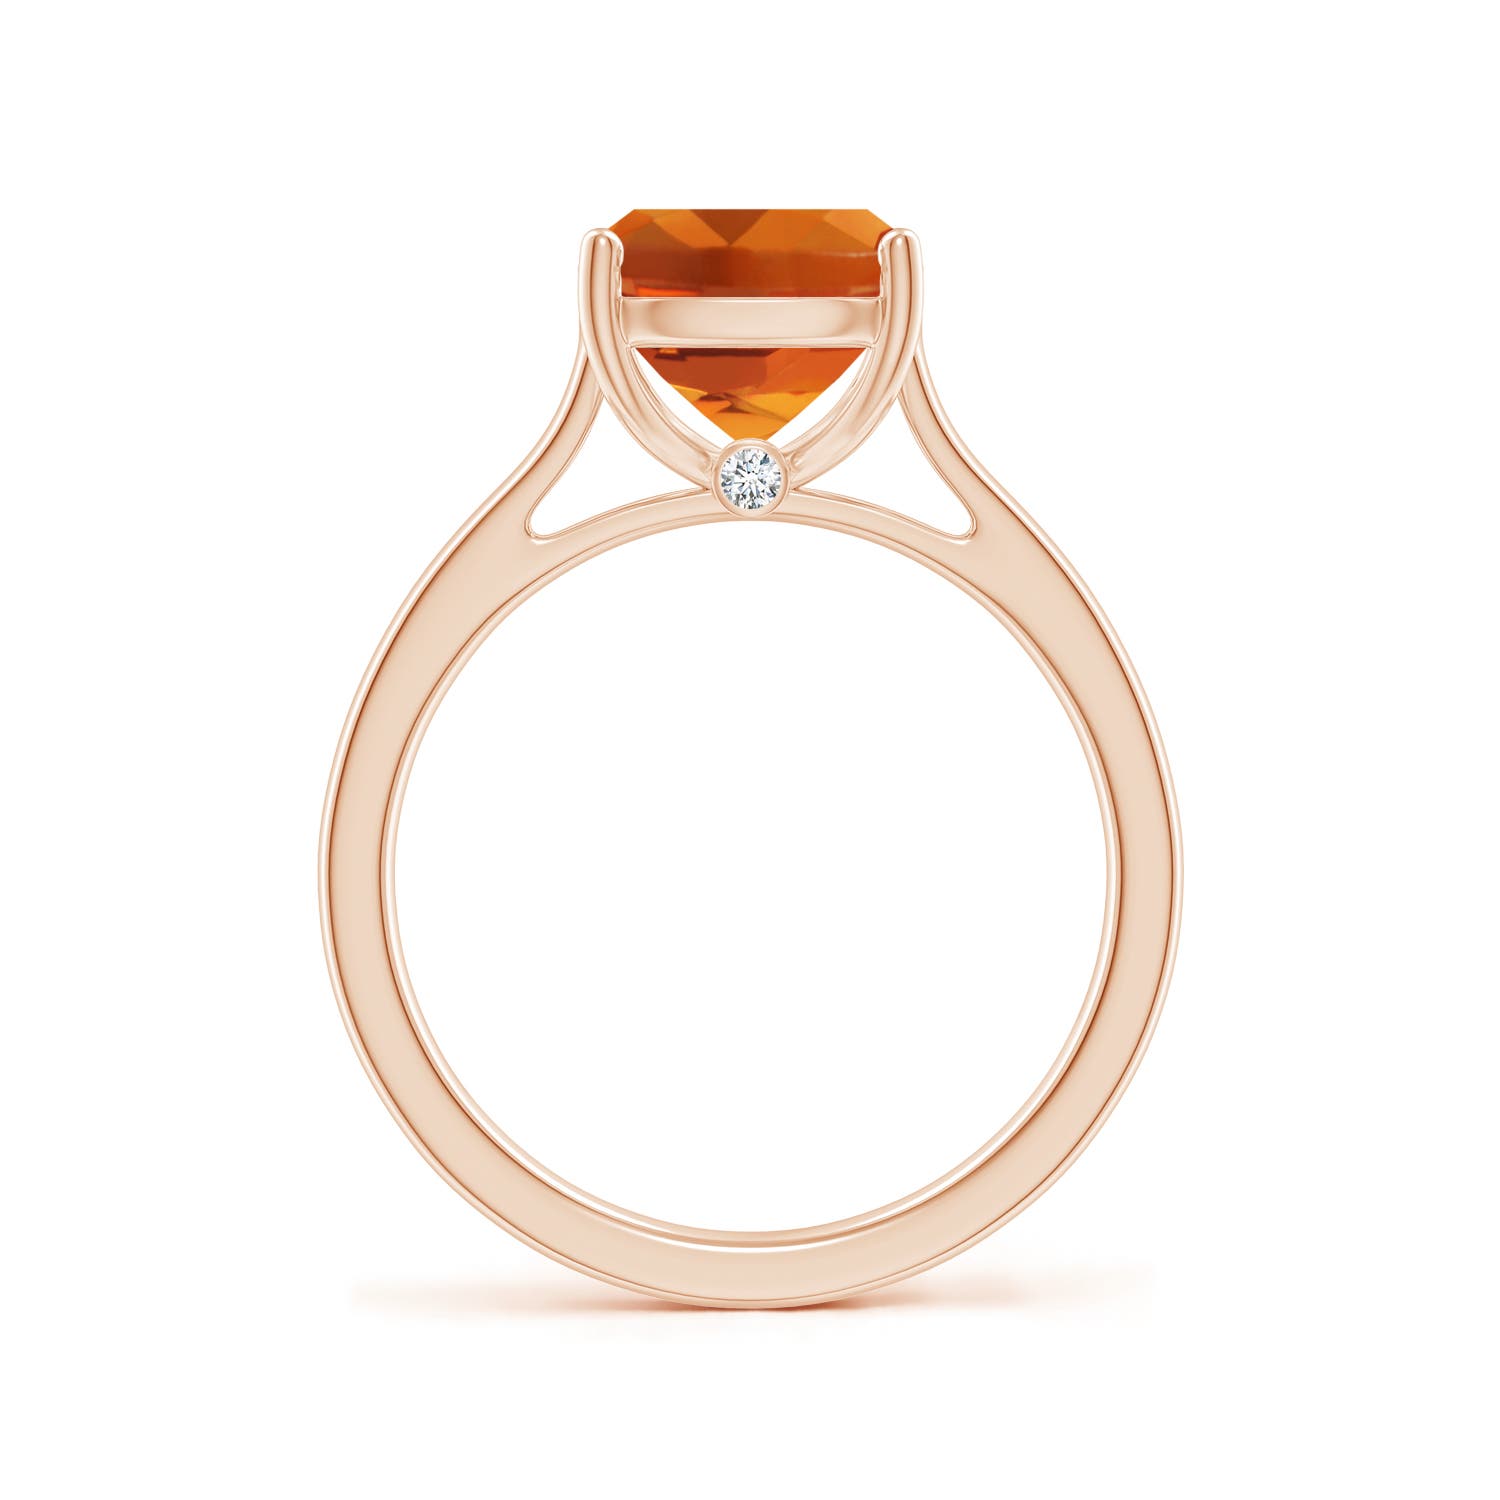 AAAA - Citrine / 2.67 CT / 14 KT Rose Gold